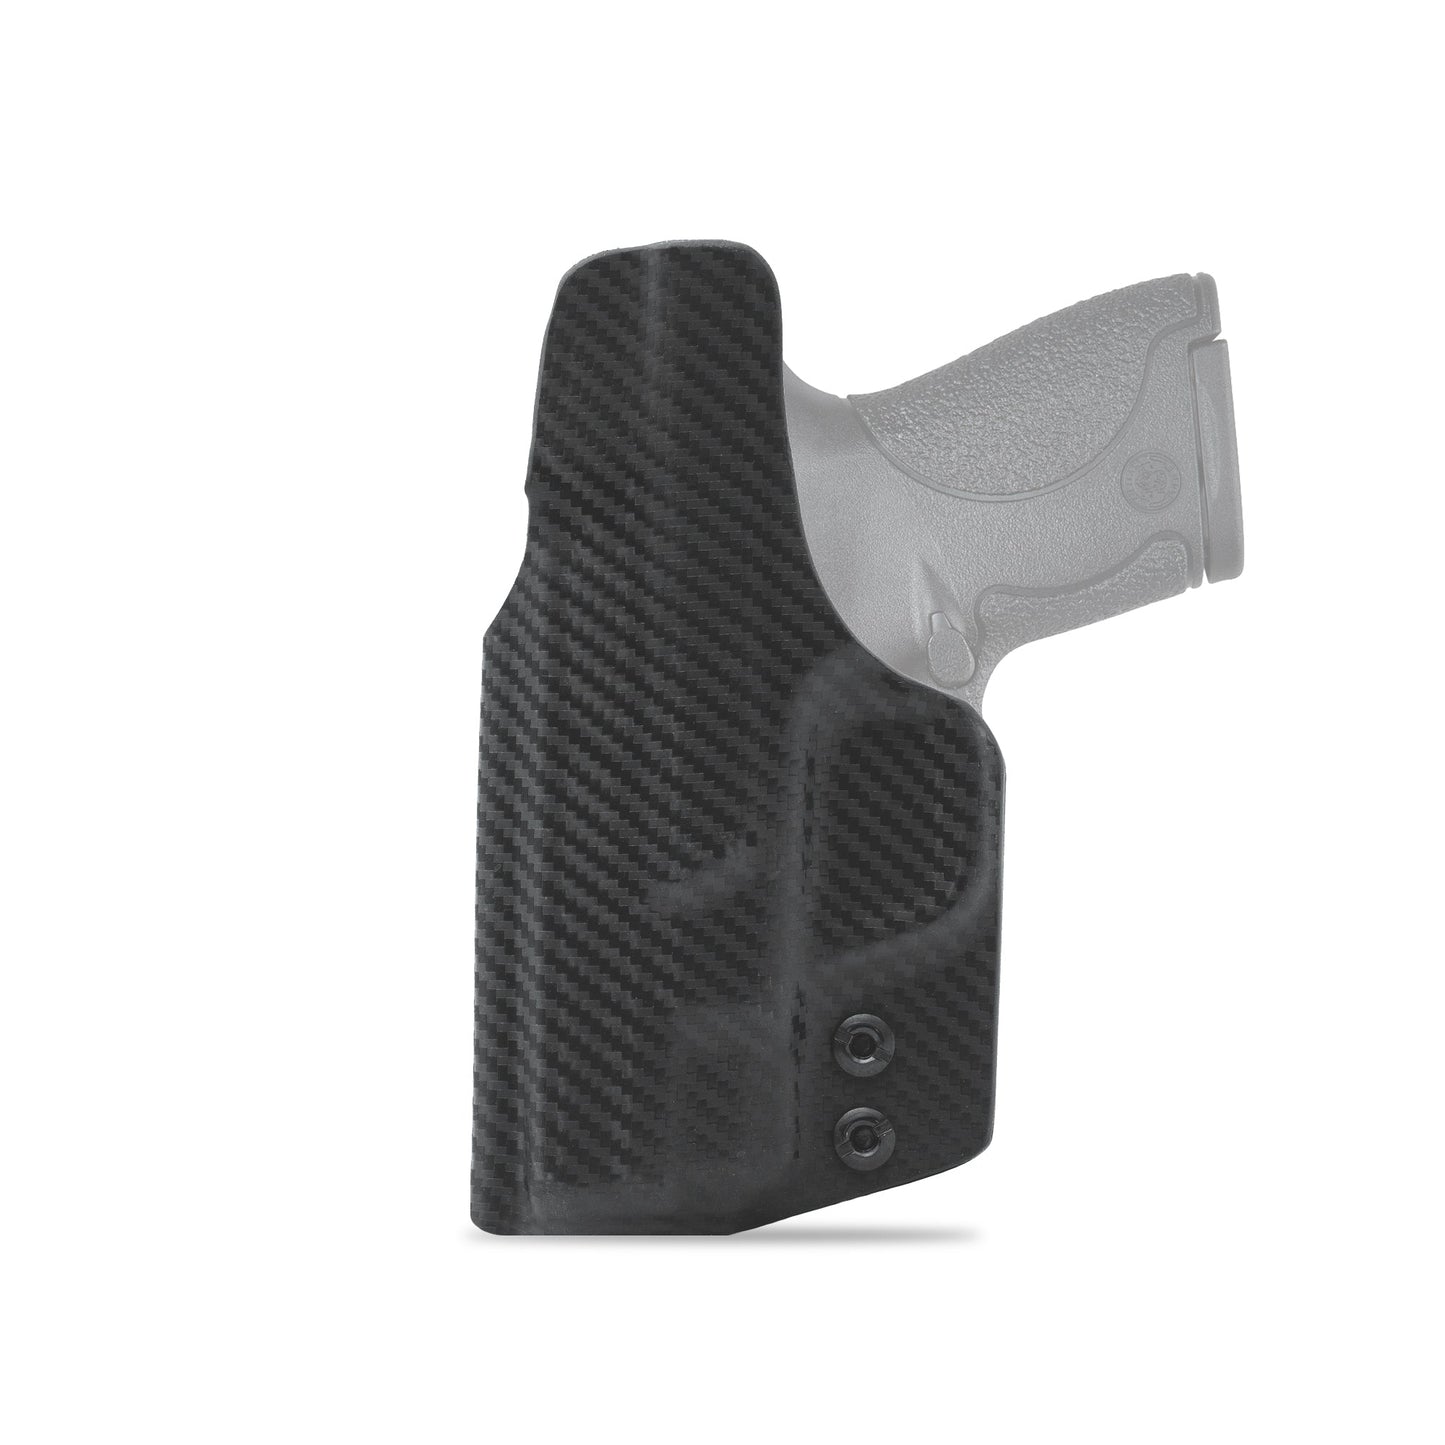 IWB Holster for the Smith & Wesson Shield, Shield+, Shield M2.0 9mm/.40 Clip & Carry